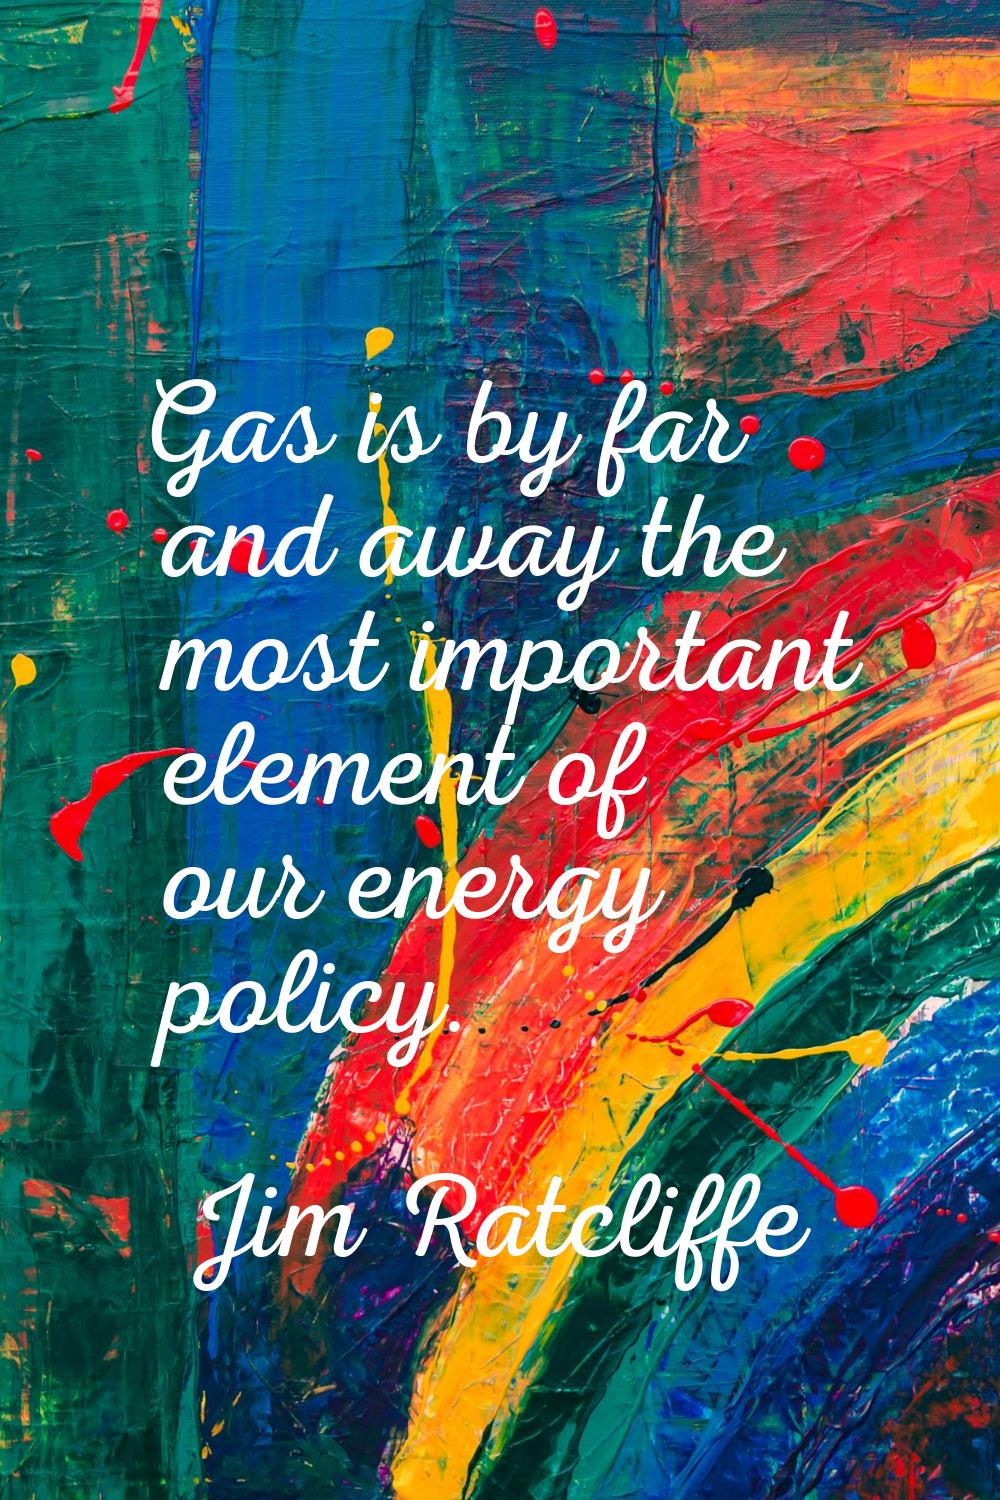 Gas is by far and away the most important element of our energy policy.